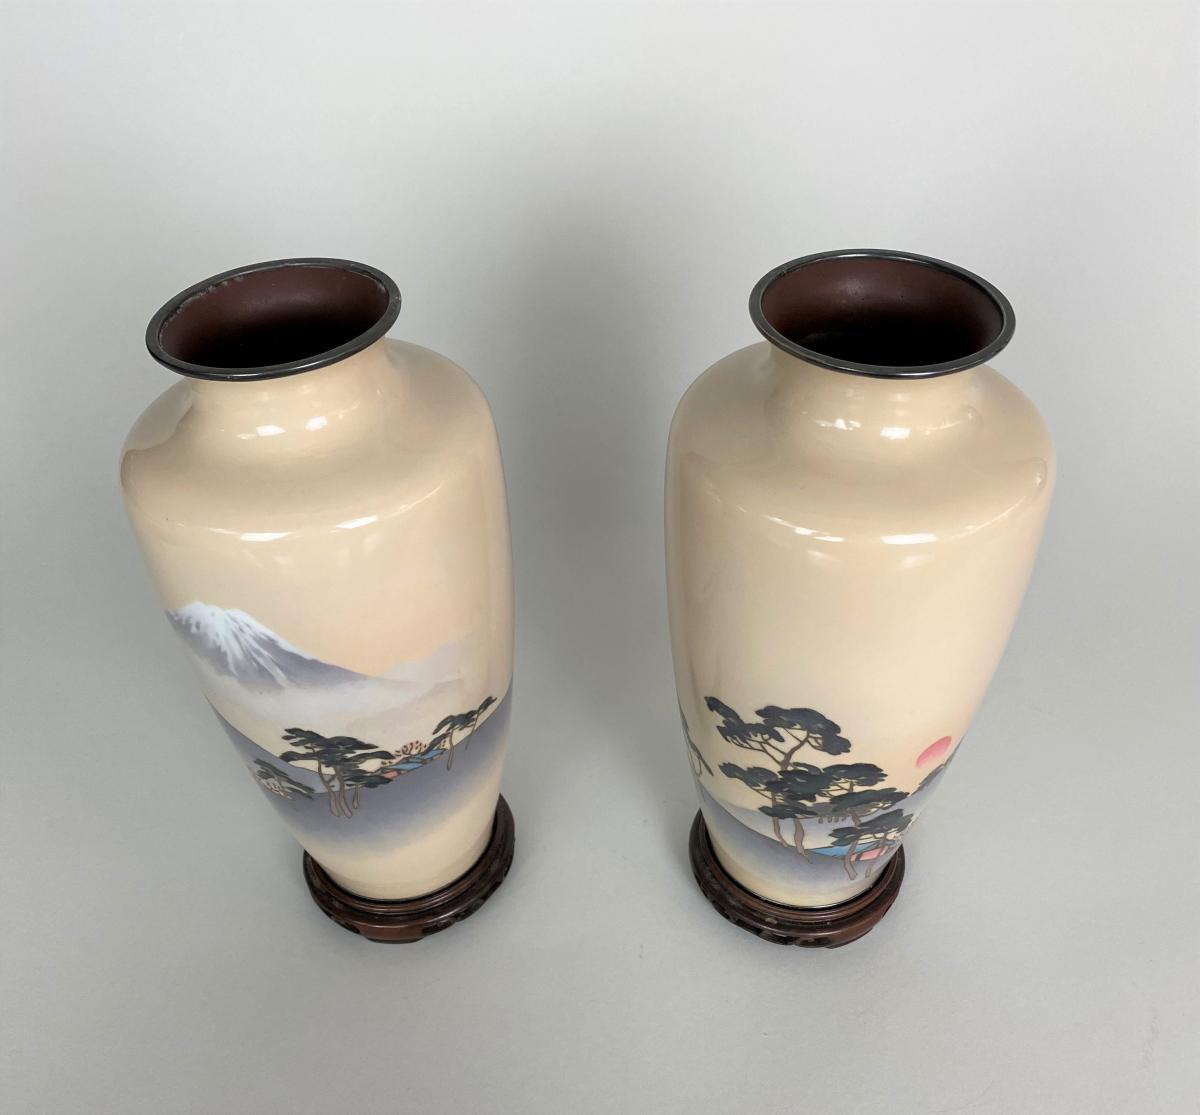 A fine pair of wireless Cloisonne vases depicting Mount Fuji and the rising Sun